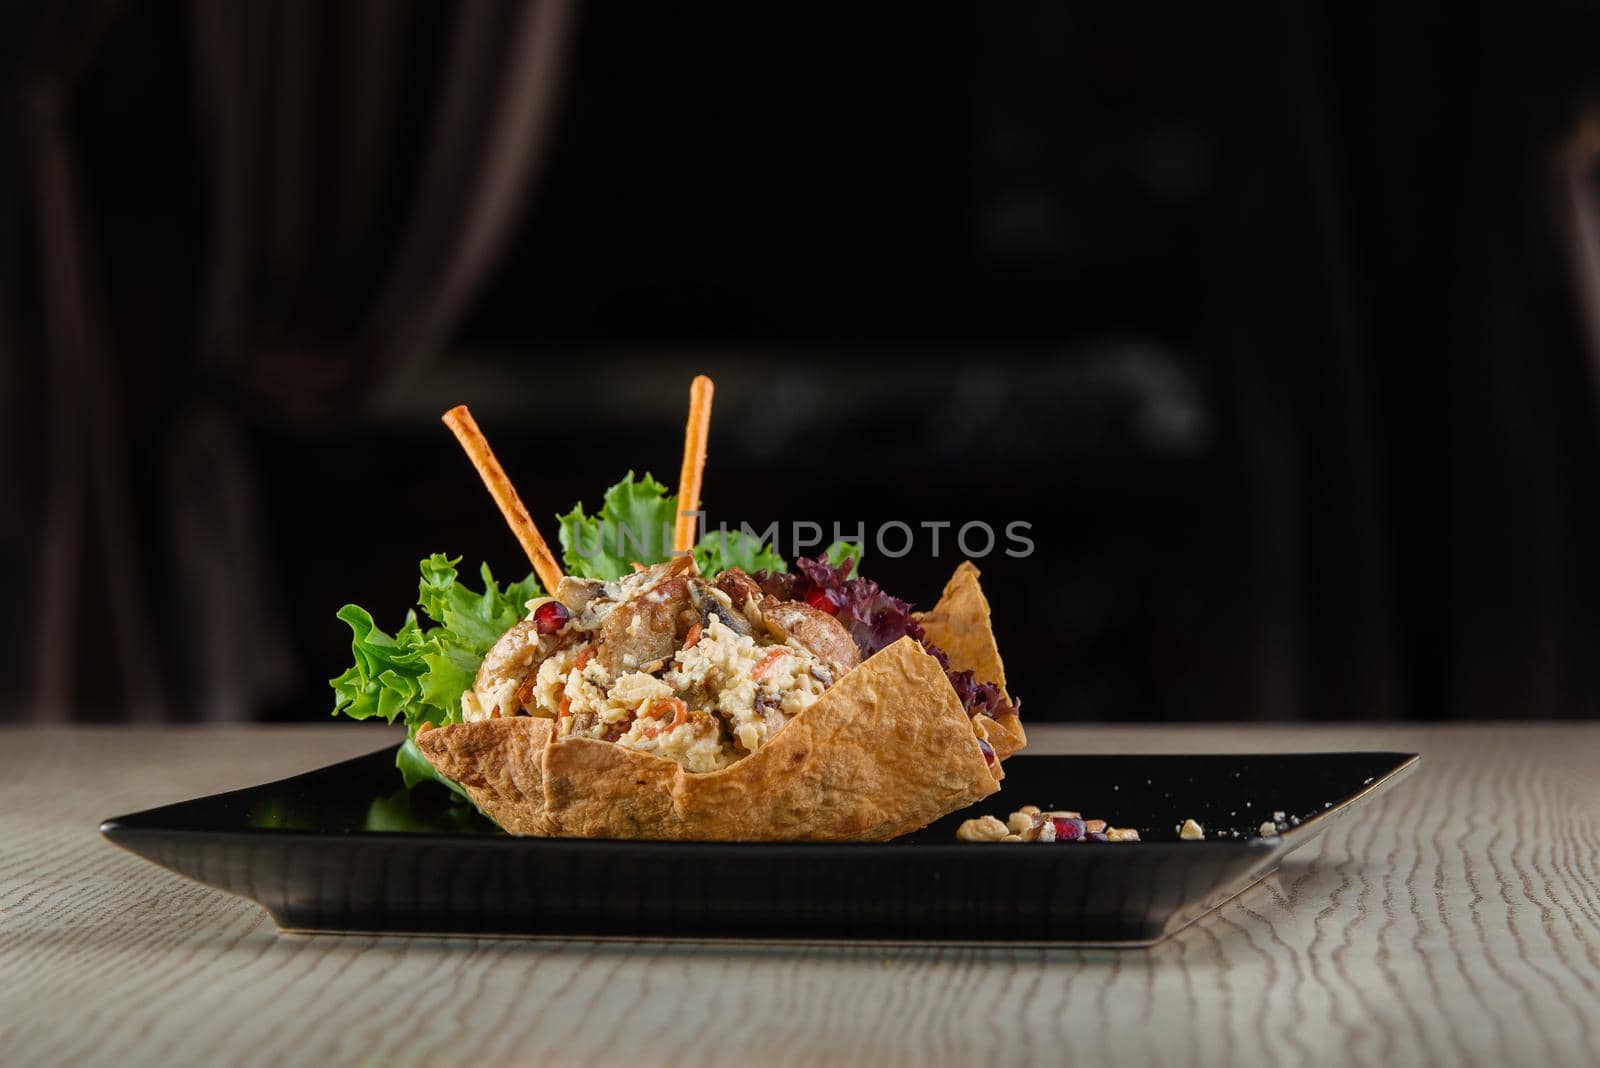 Pilaf in the form of fried pita bread, garnished with bread sticks and lettuce on a black square plate on a white wooden table by Rabizo